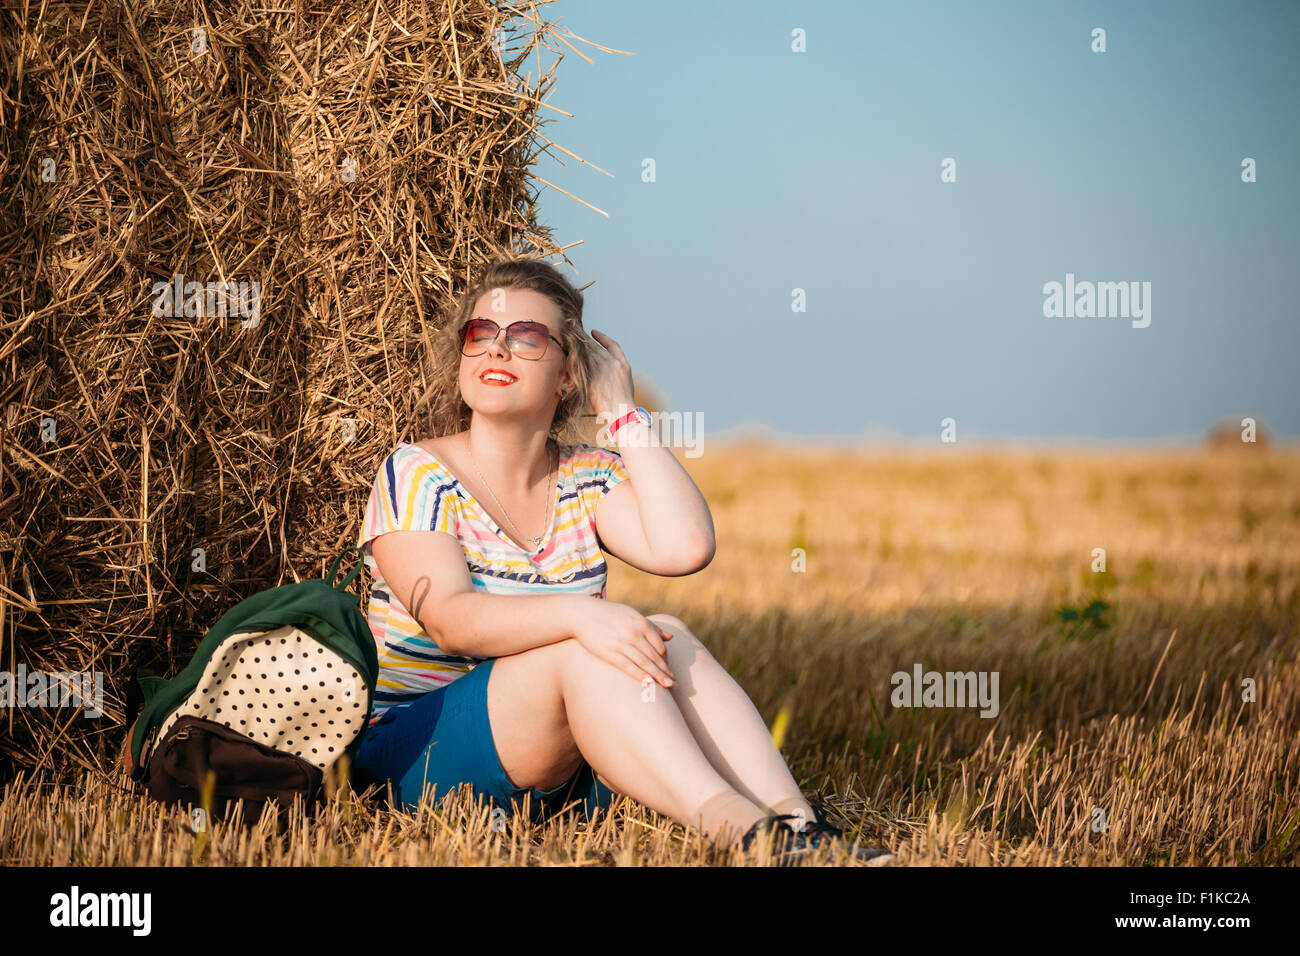 Beautiful Plus Size Young Woman In Shirt Posing In Summer Field Meadow On Hay Bales At Sunset Background Stock Photo